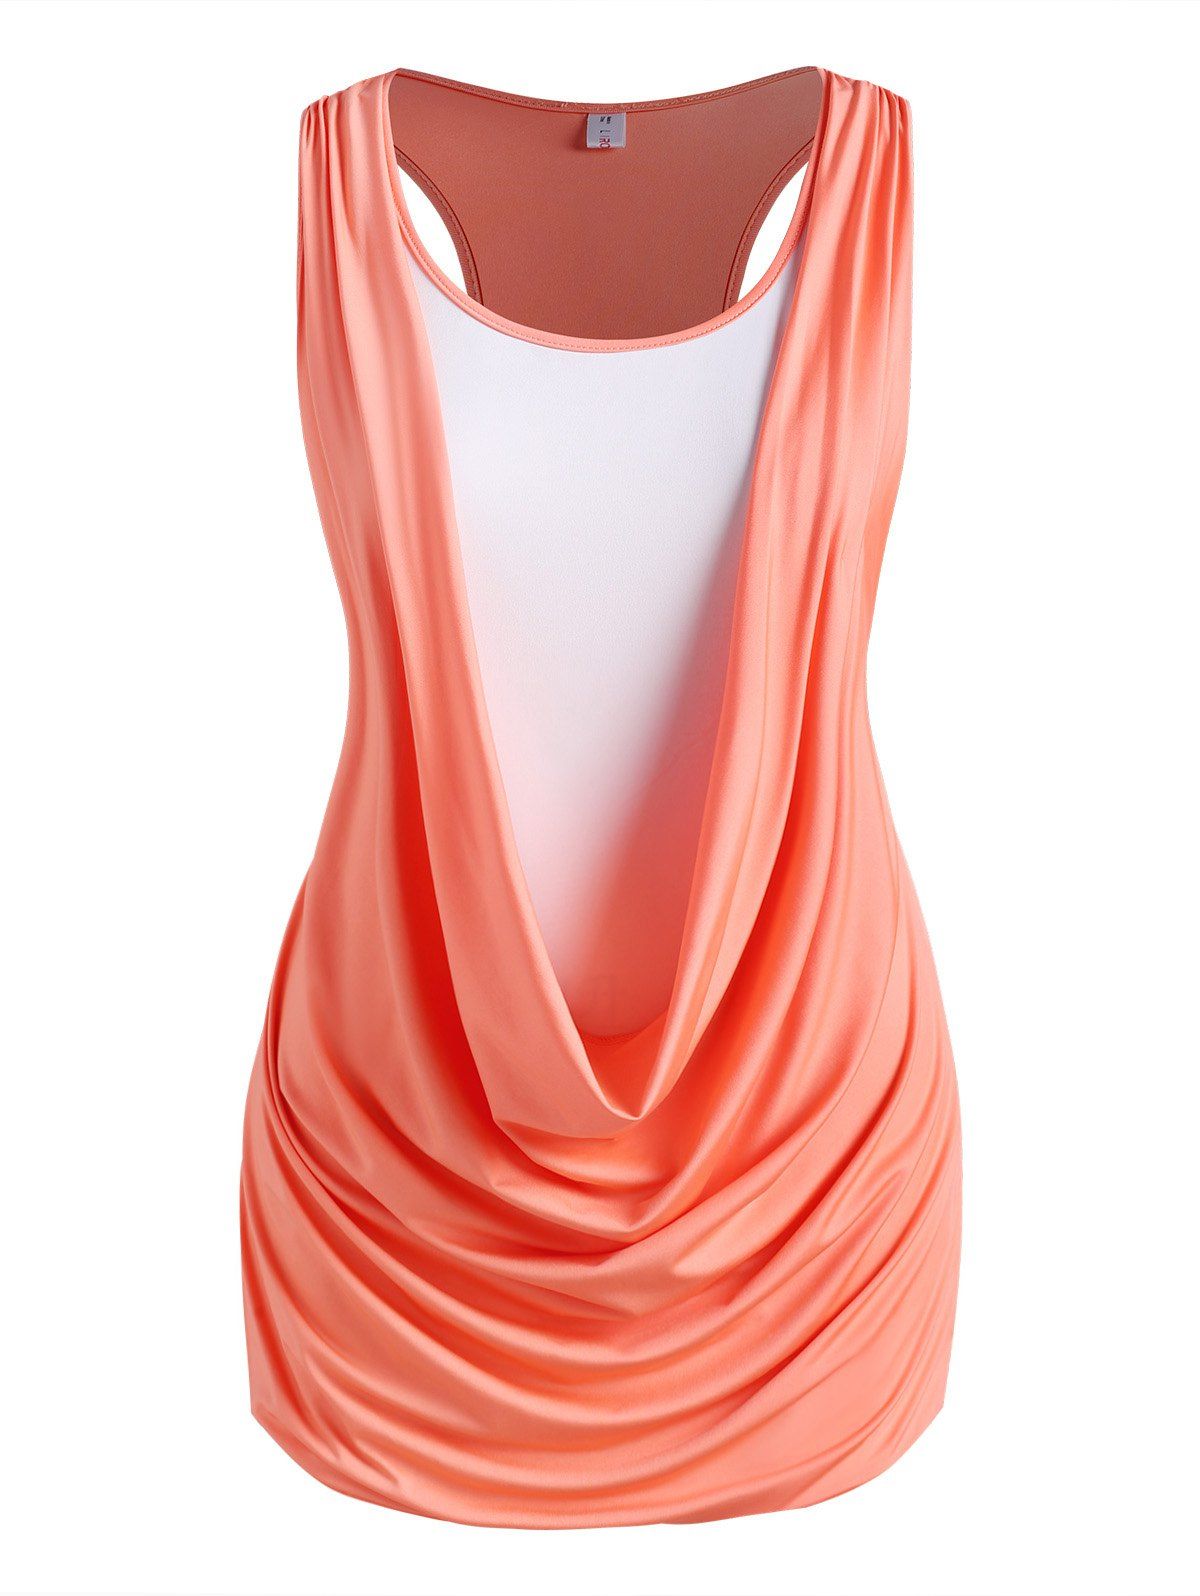 Plus Size Draped Racerback 2 In 1 Ruched Tank Top - ORANGE 5X